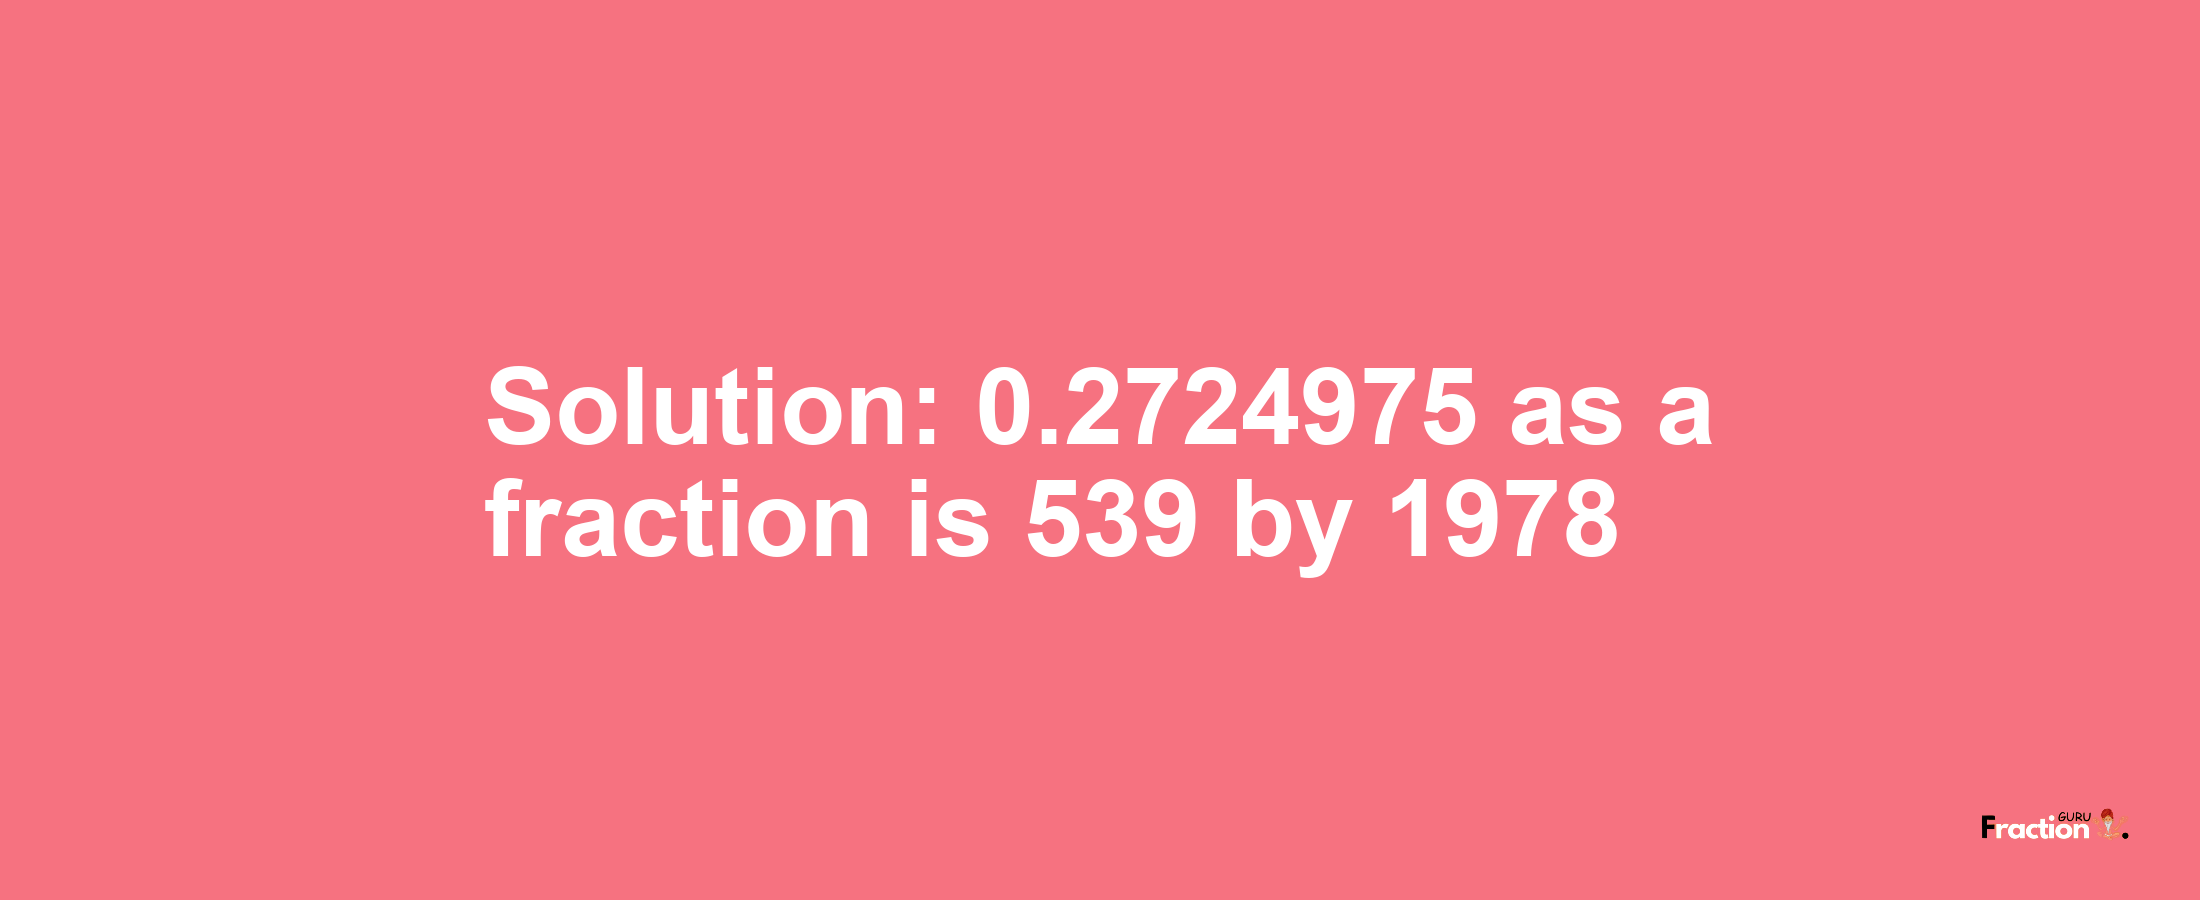 Solution:0.2724975 as a fraction is 539/1978